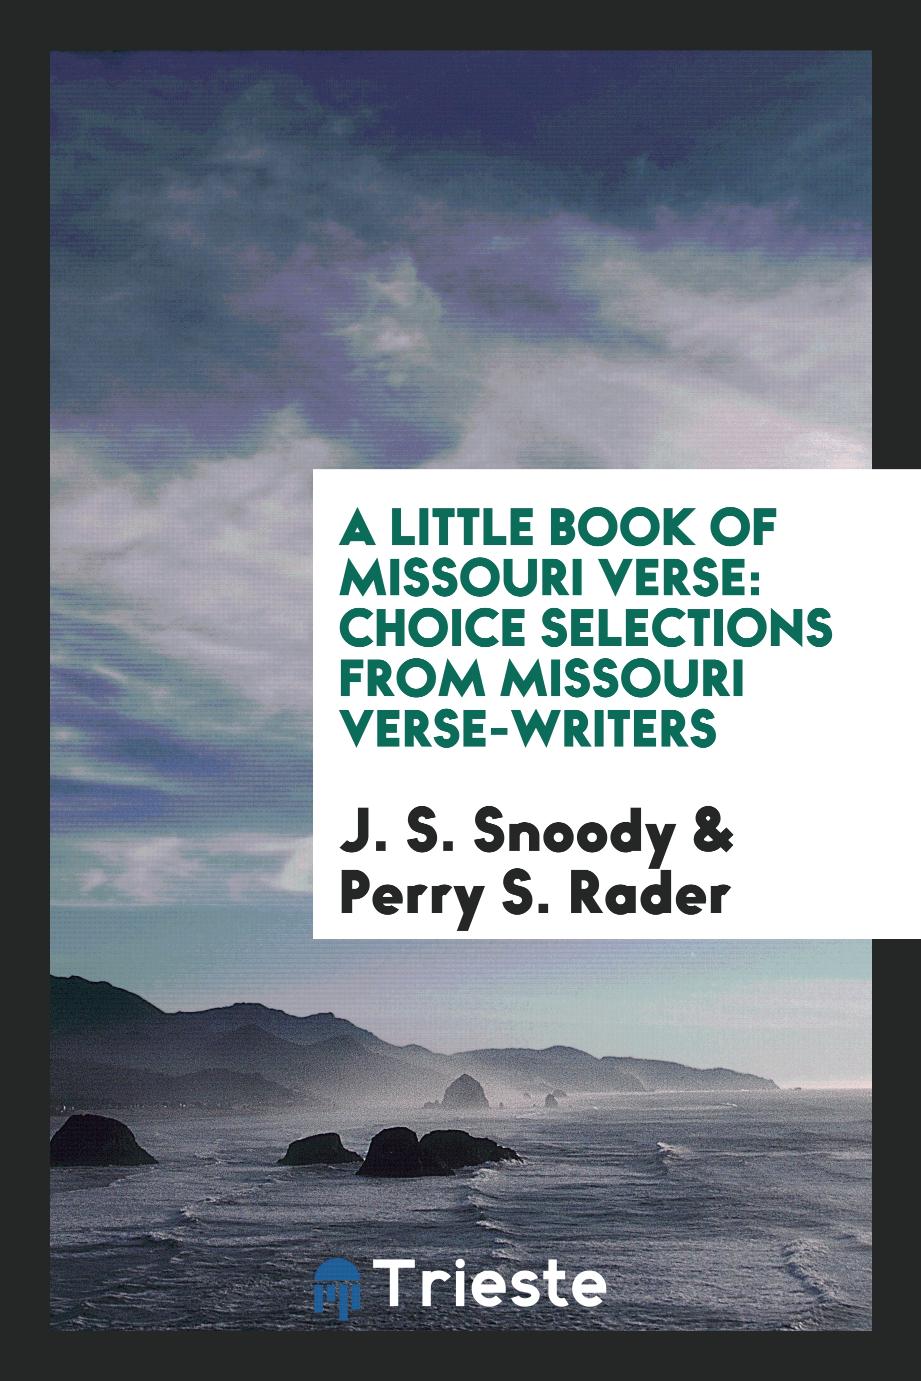 A Little Book of Missouri Verse: Choice Selections from Missouri Verse-Writers